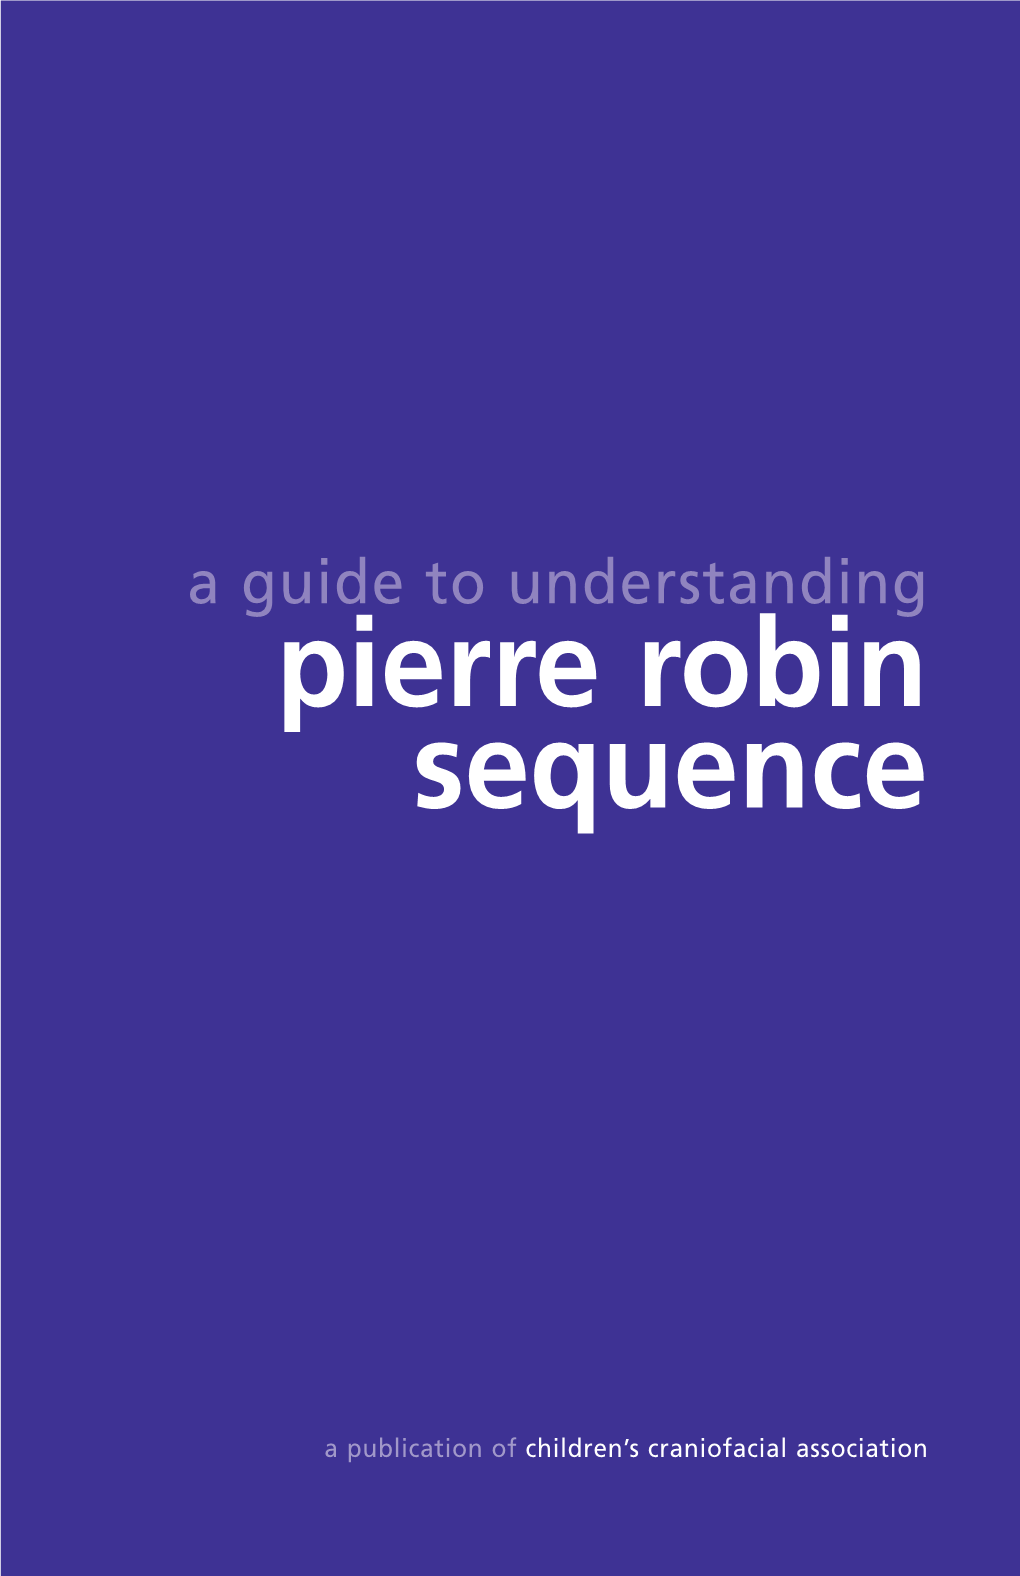 Pierre Robin Sequence